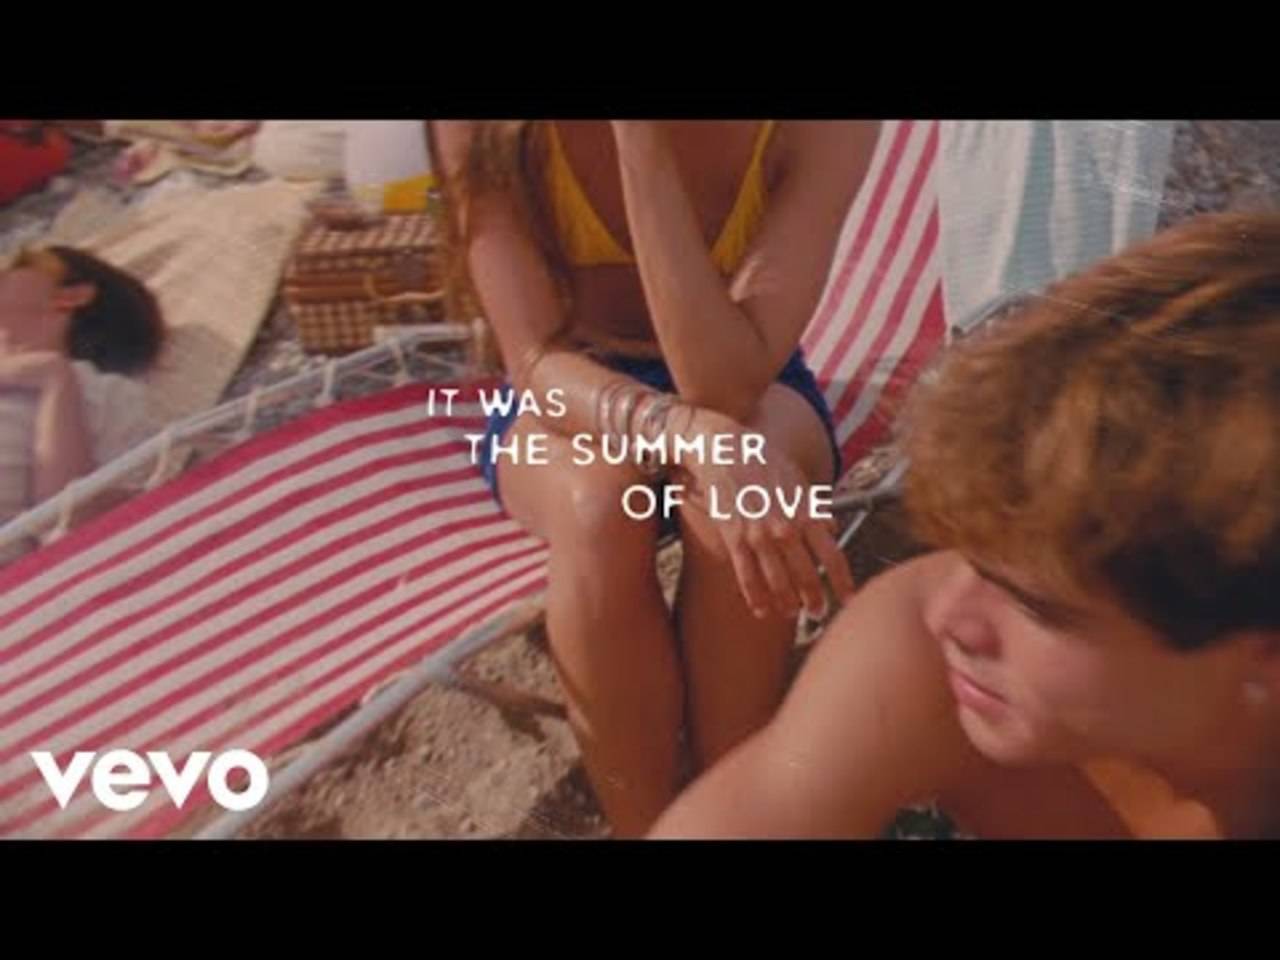 Watch Latest English Official Music Lyrical Video Song - Summer Of Love Sung By Shawn Mendes And Tainy English Video Songs